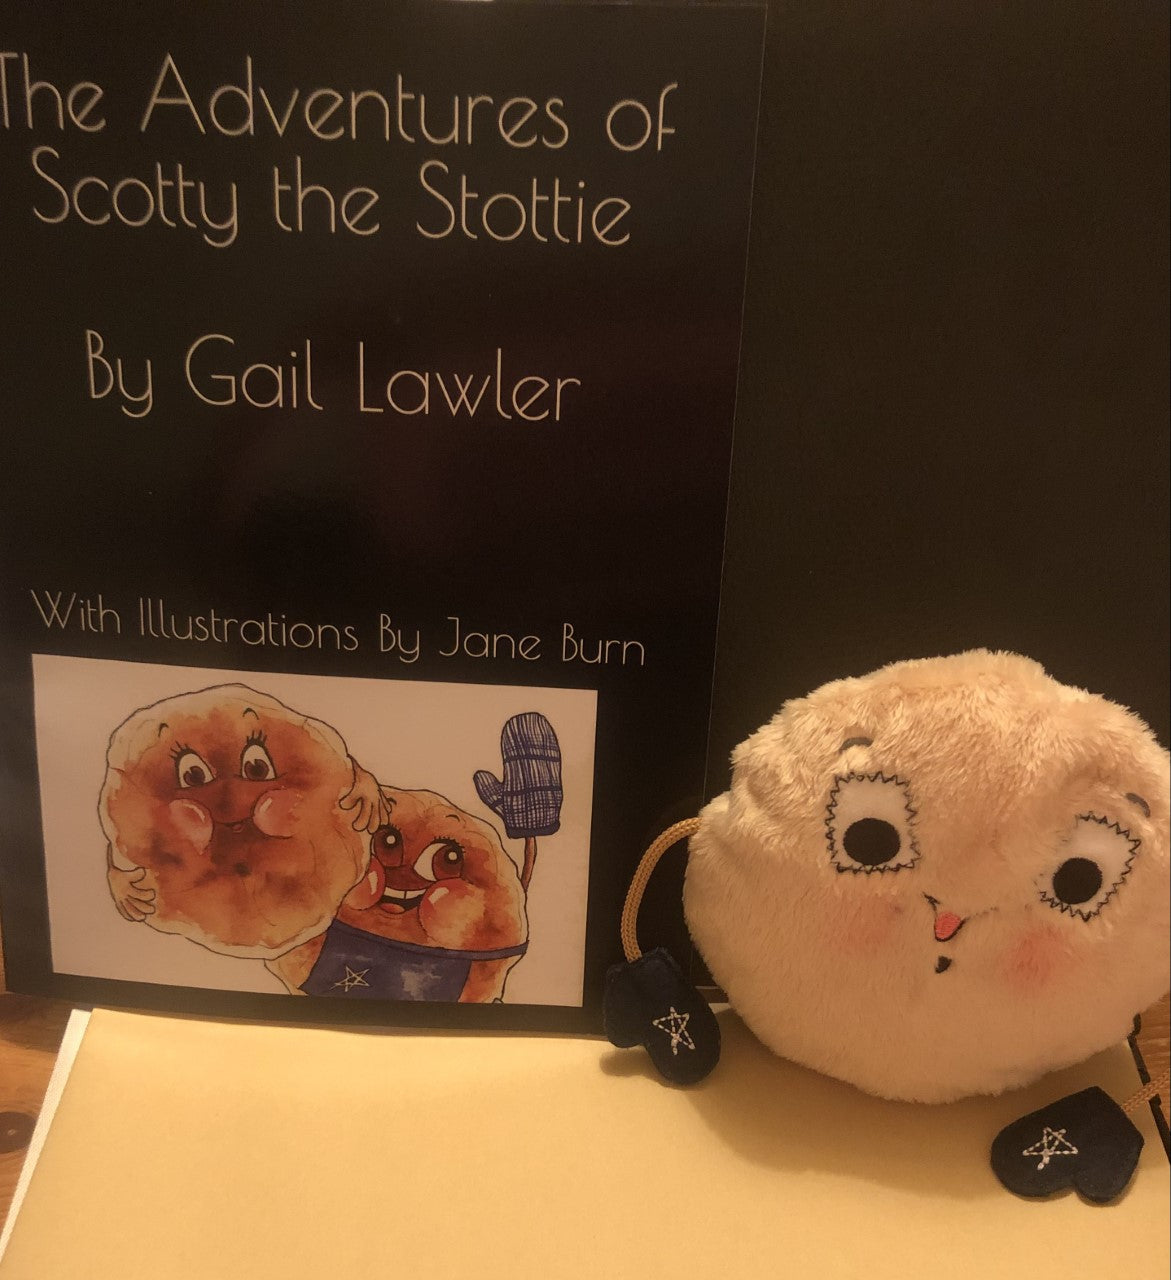 Scotty the Stottie toy & book